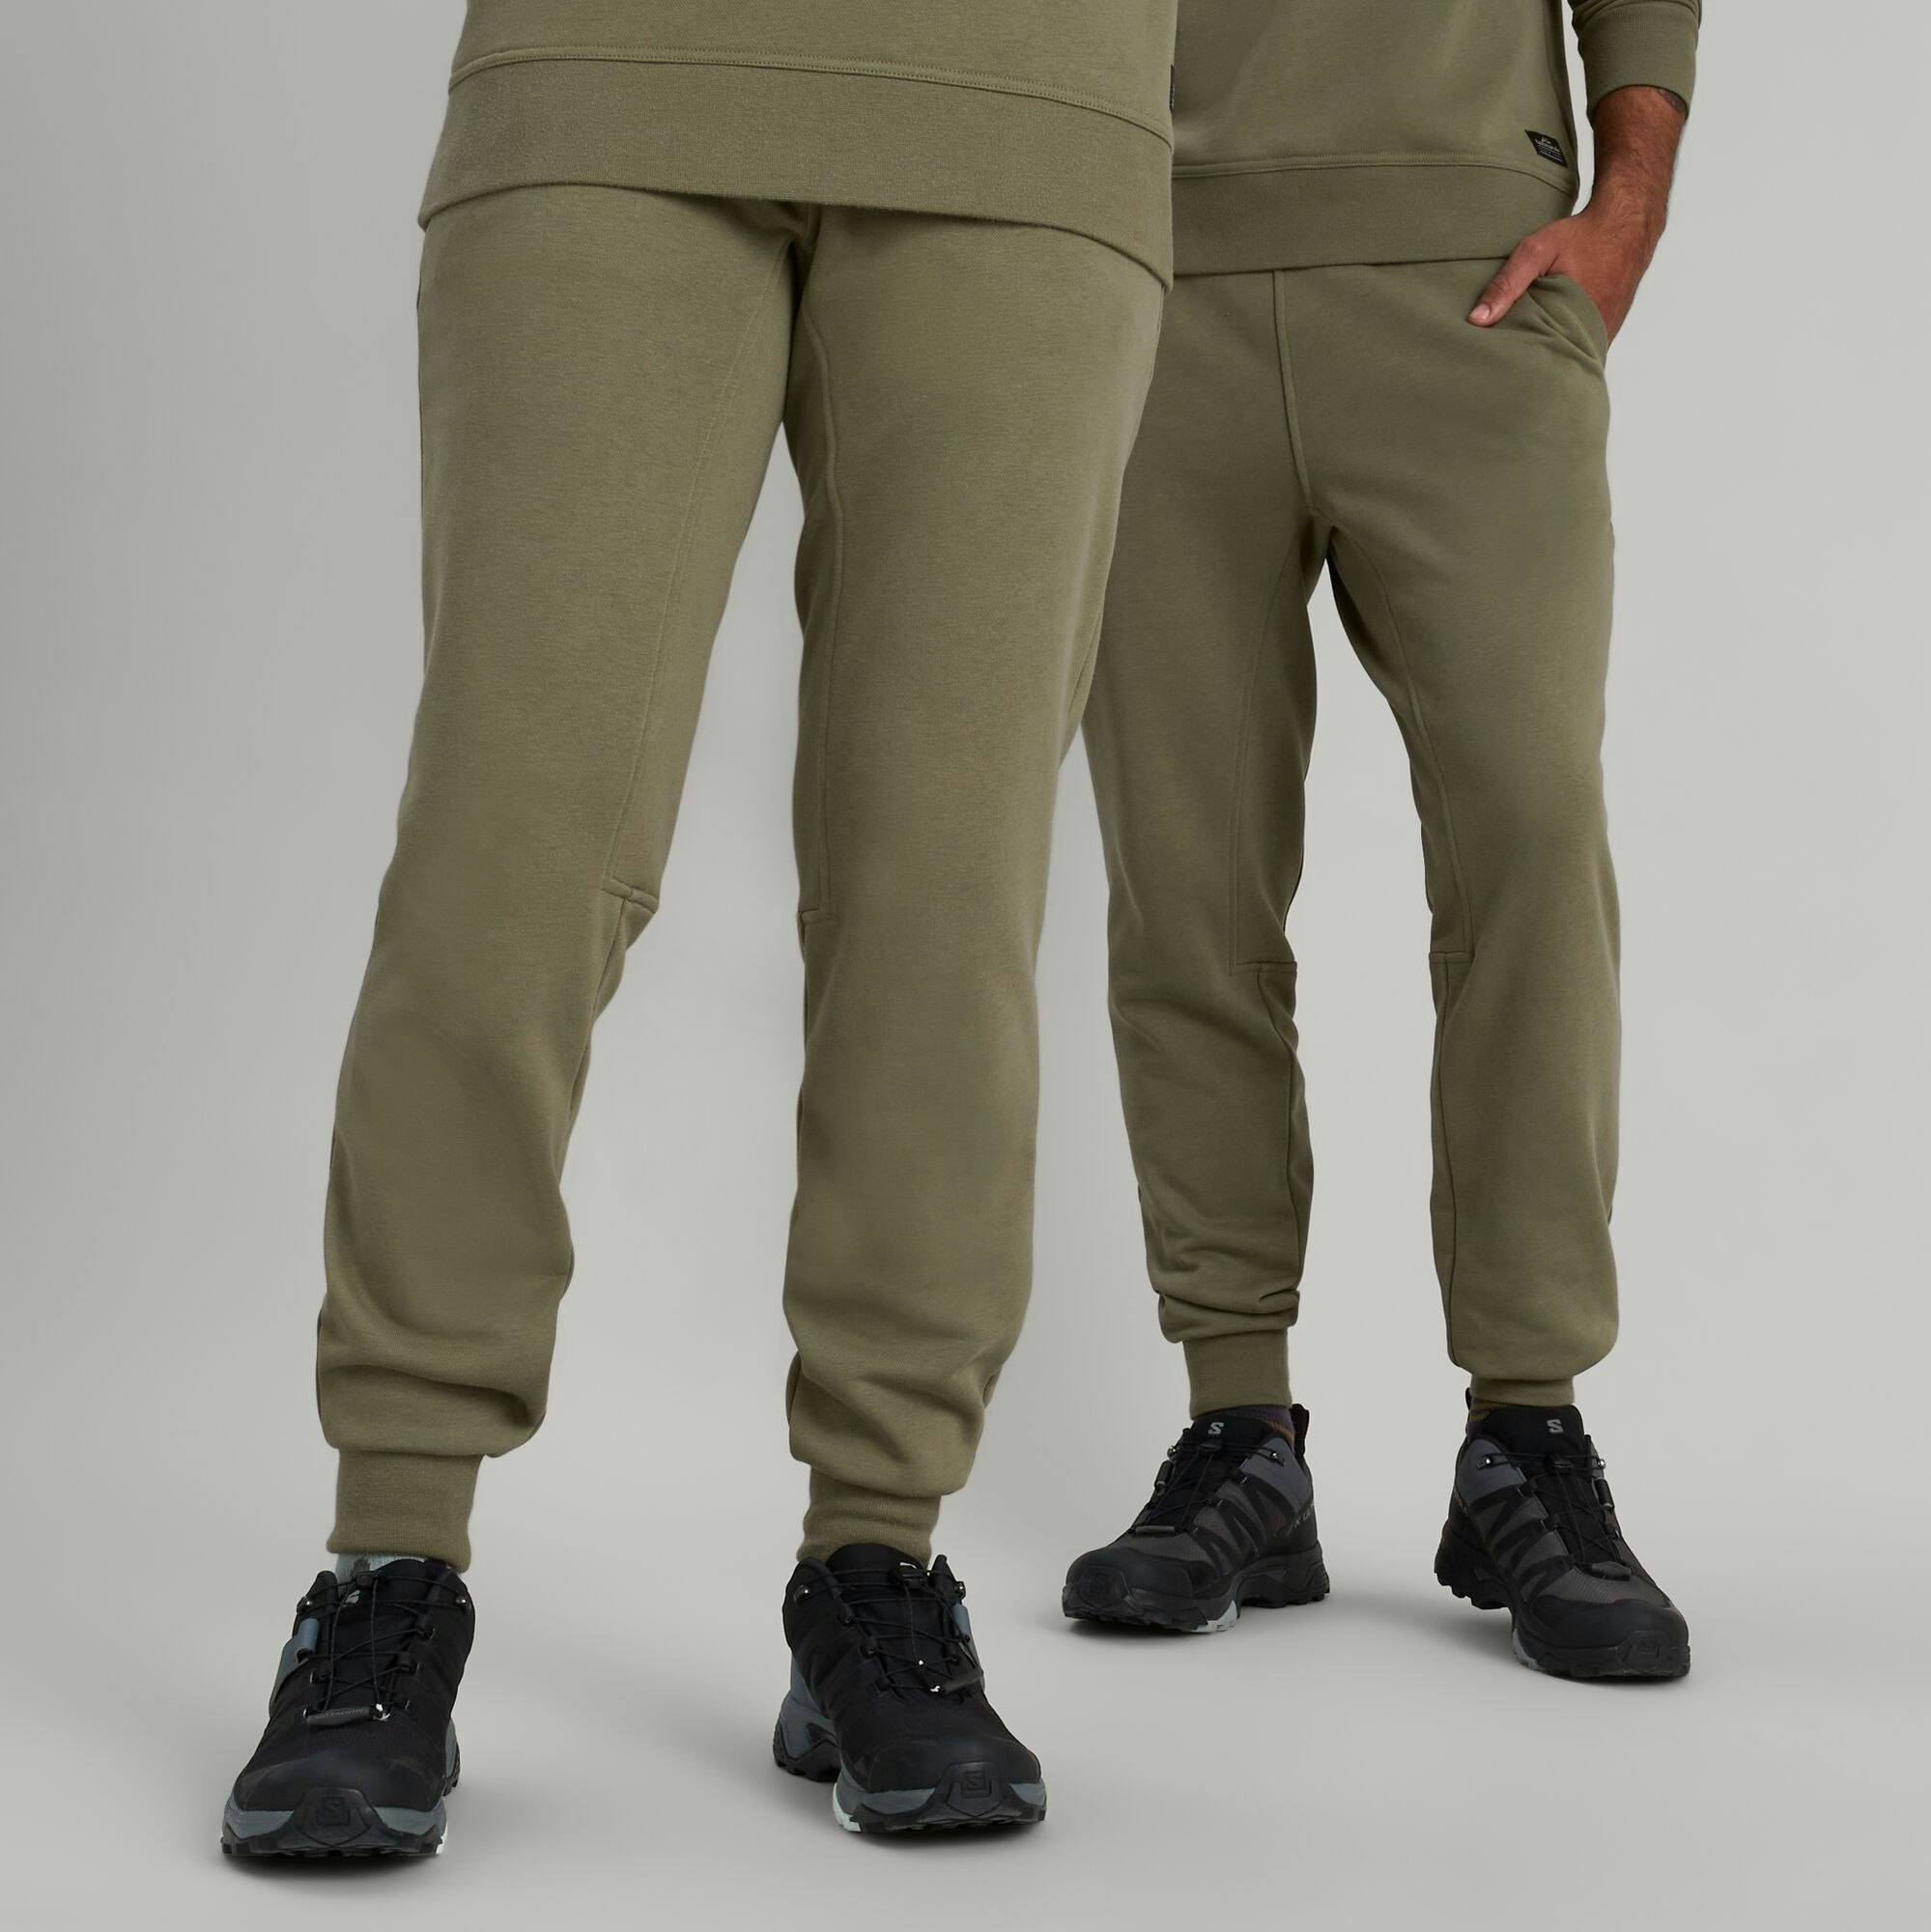 Clearance: ANY-Time Sweats LT Unisex Joggers